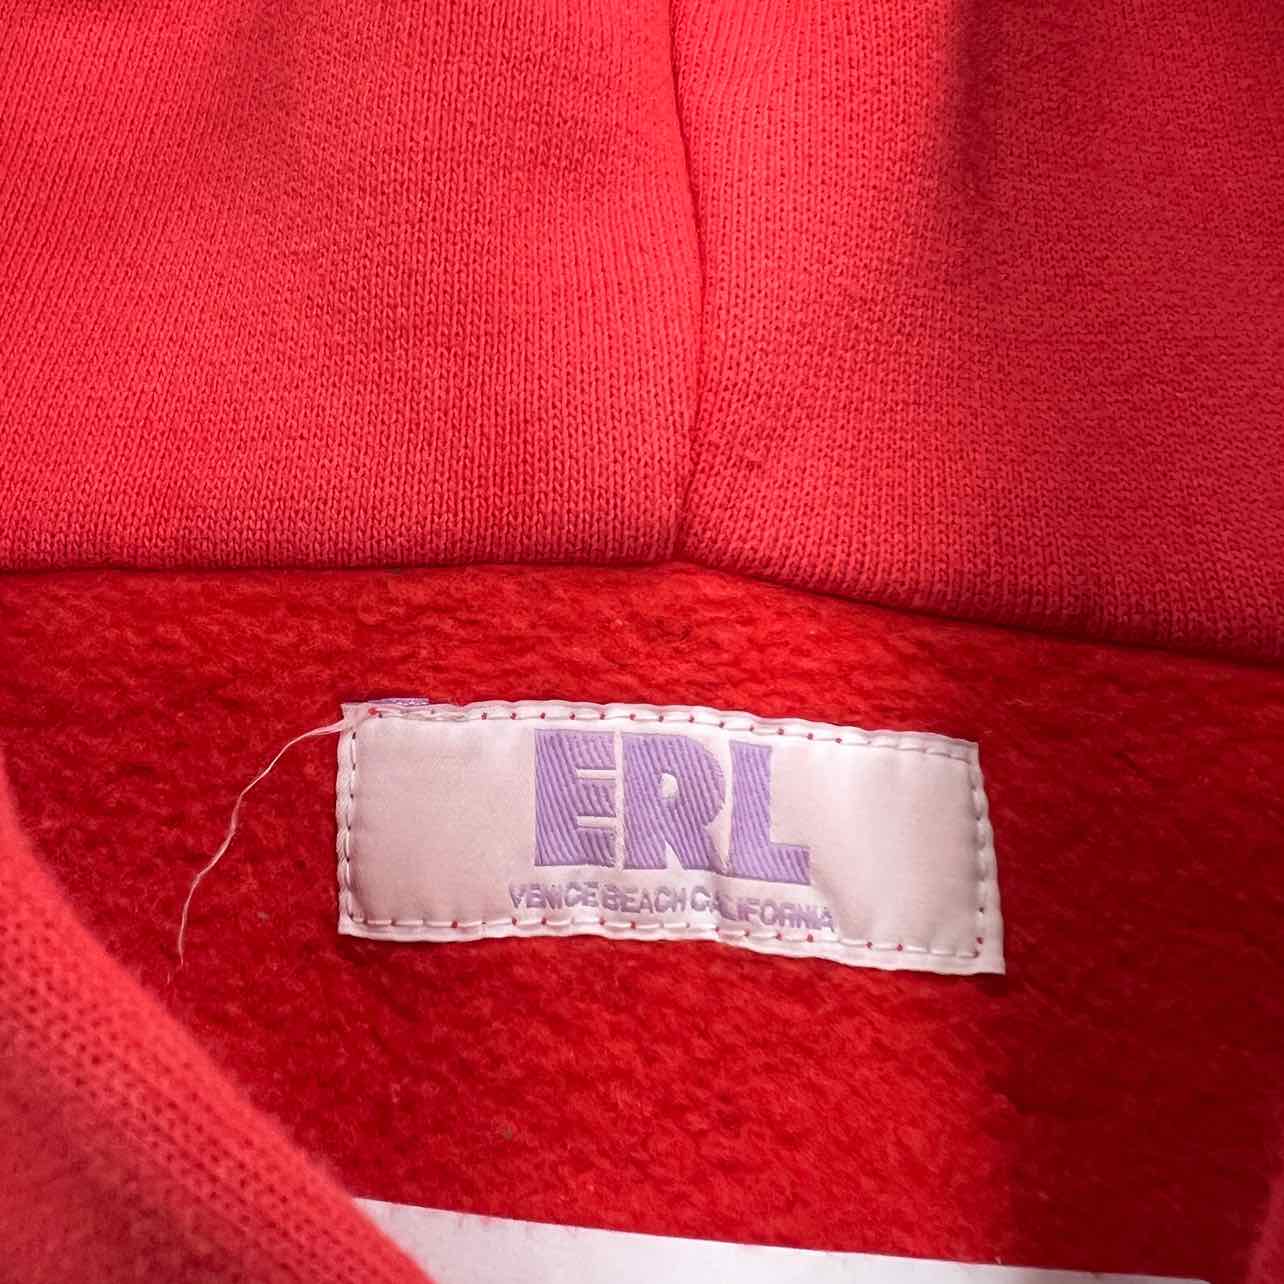 ERL Hoodie &quot;SWIRL&quot; Multi-Color Used Size M